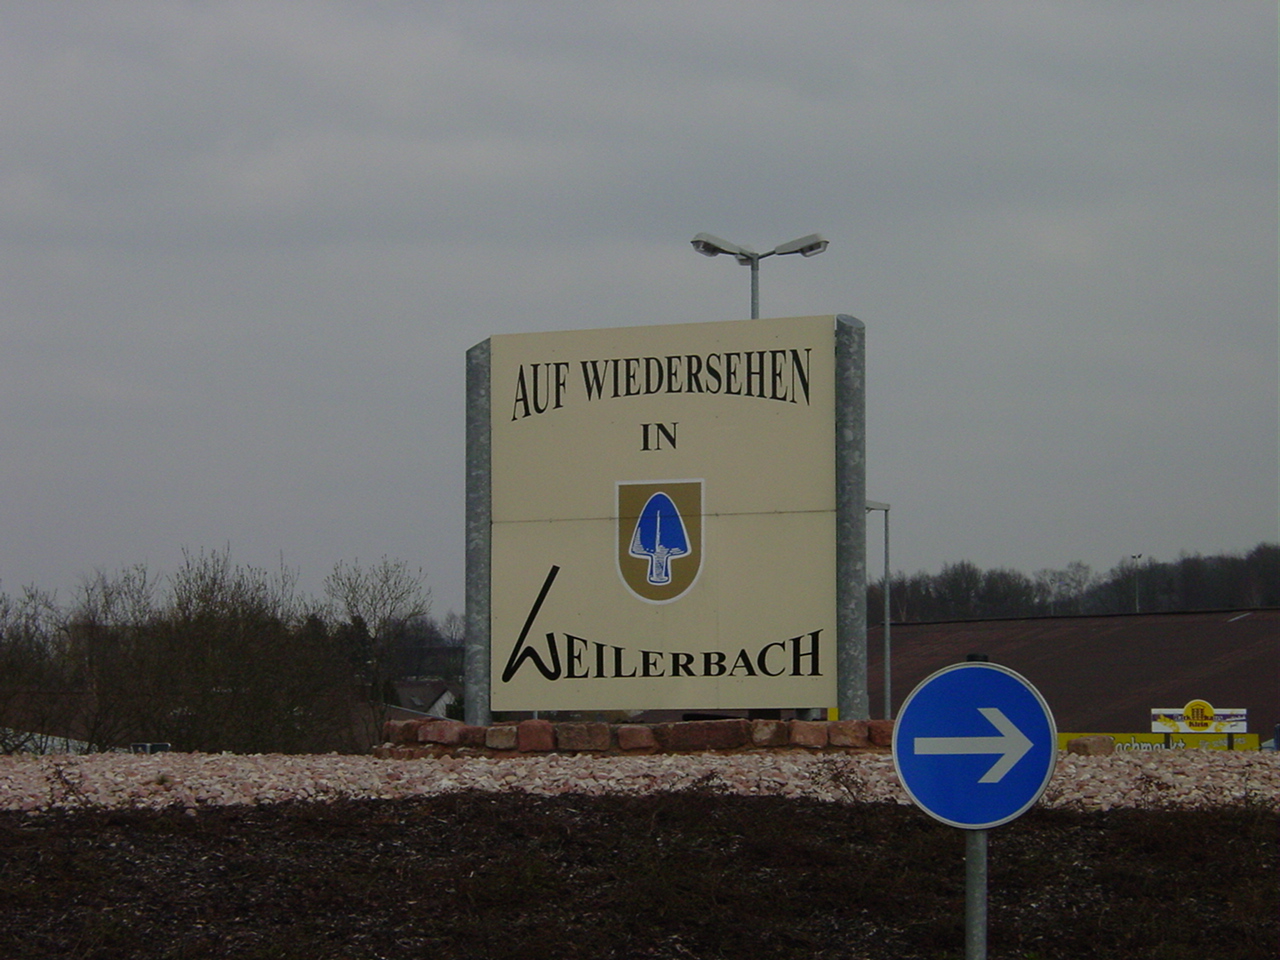 I spotted this while driving by the village of Weilerbach, Germany.  I had to whip a U and take this shot.  
